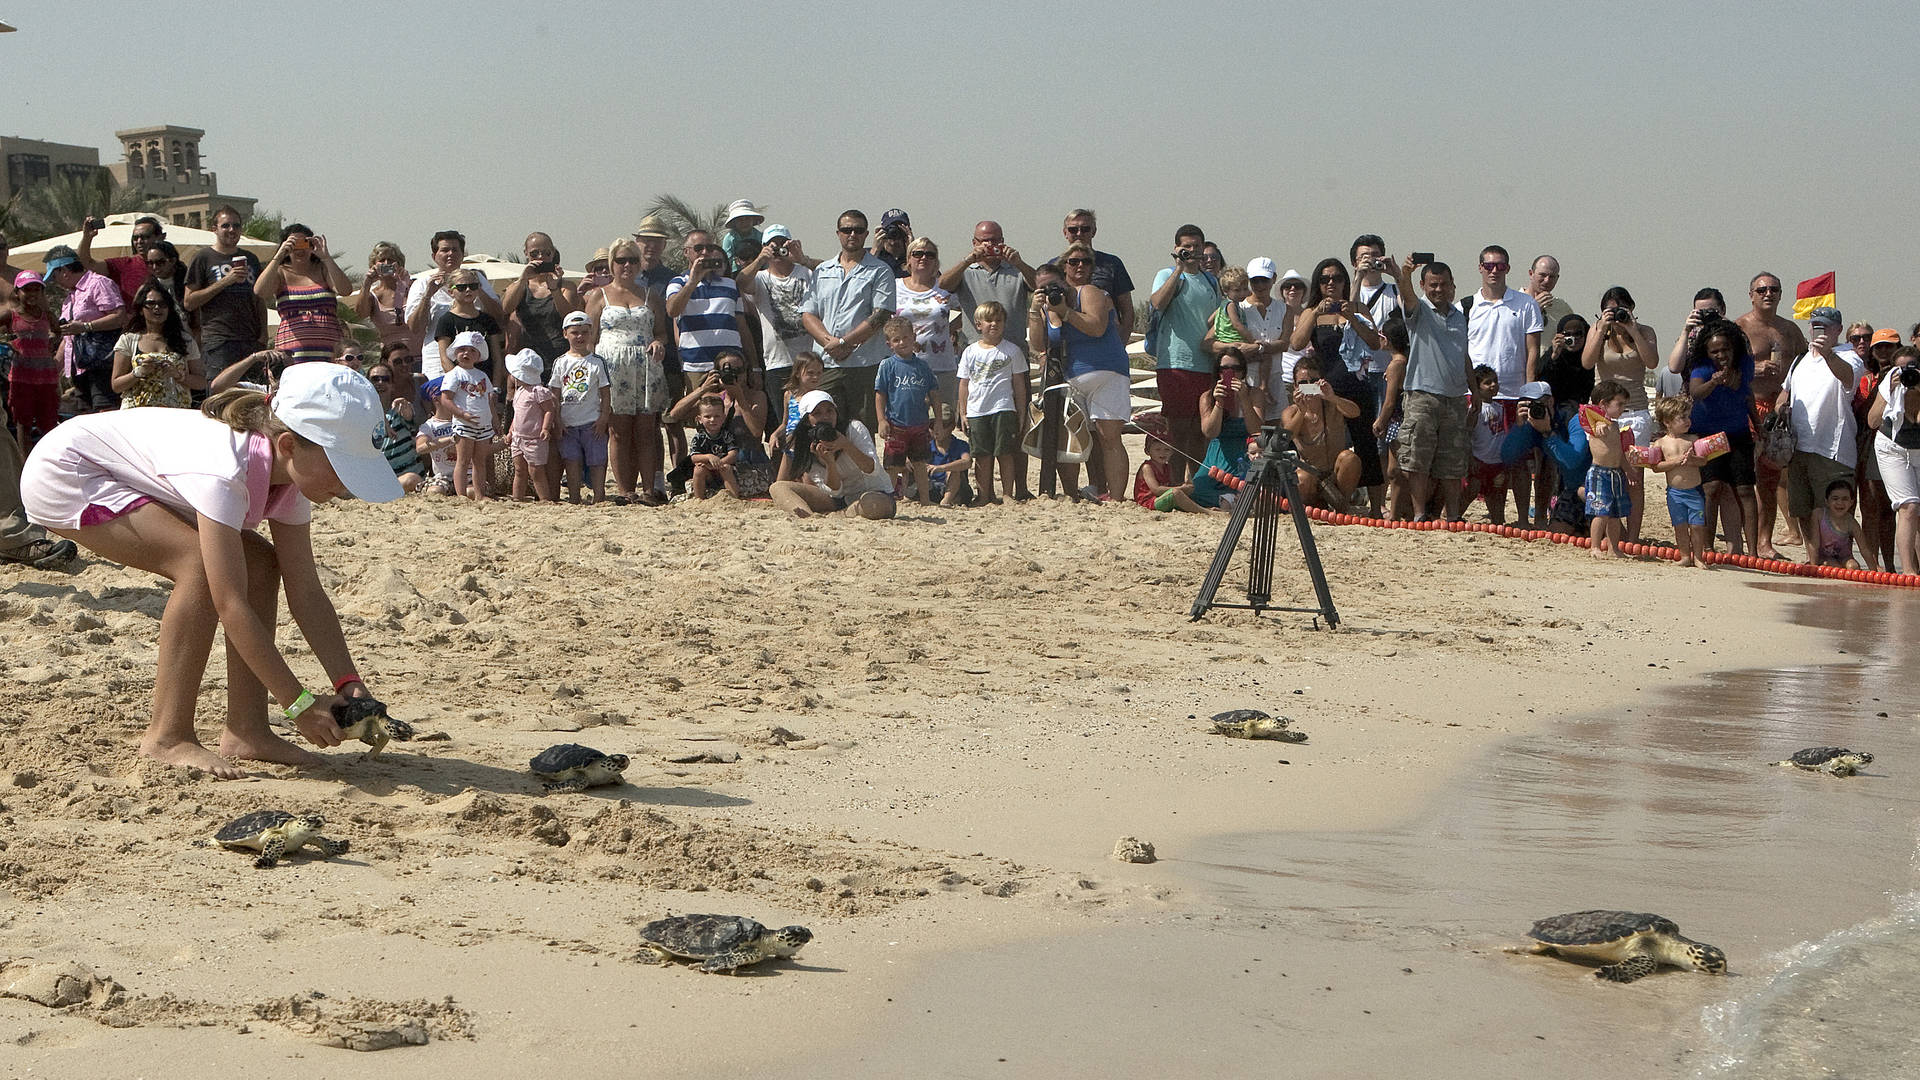 The turtle release at Jumeirah Al Naseem